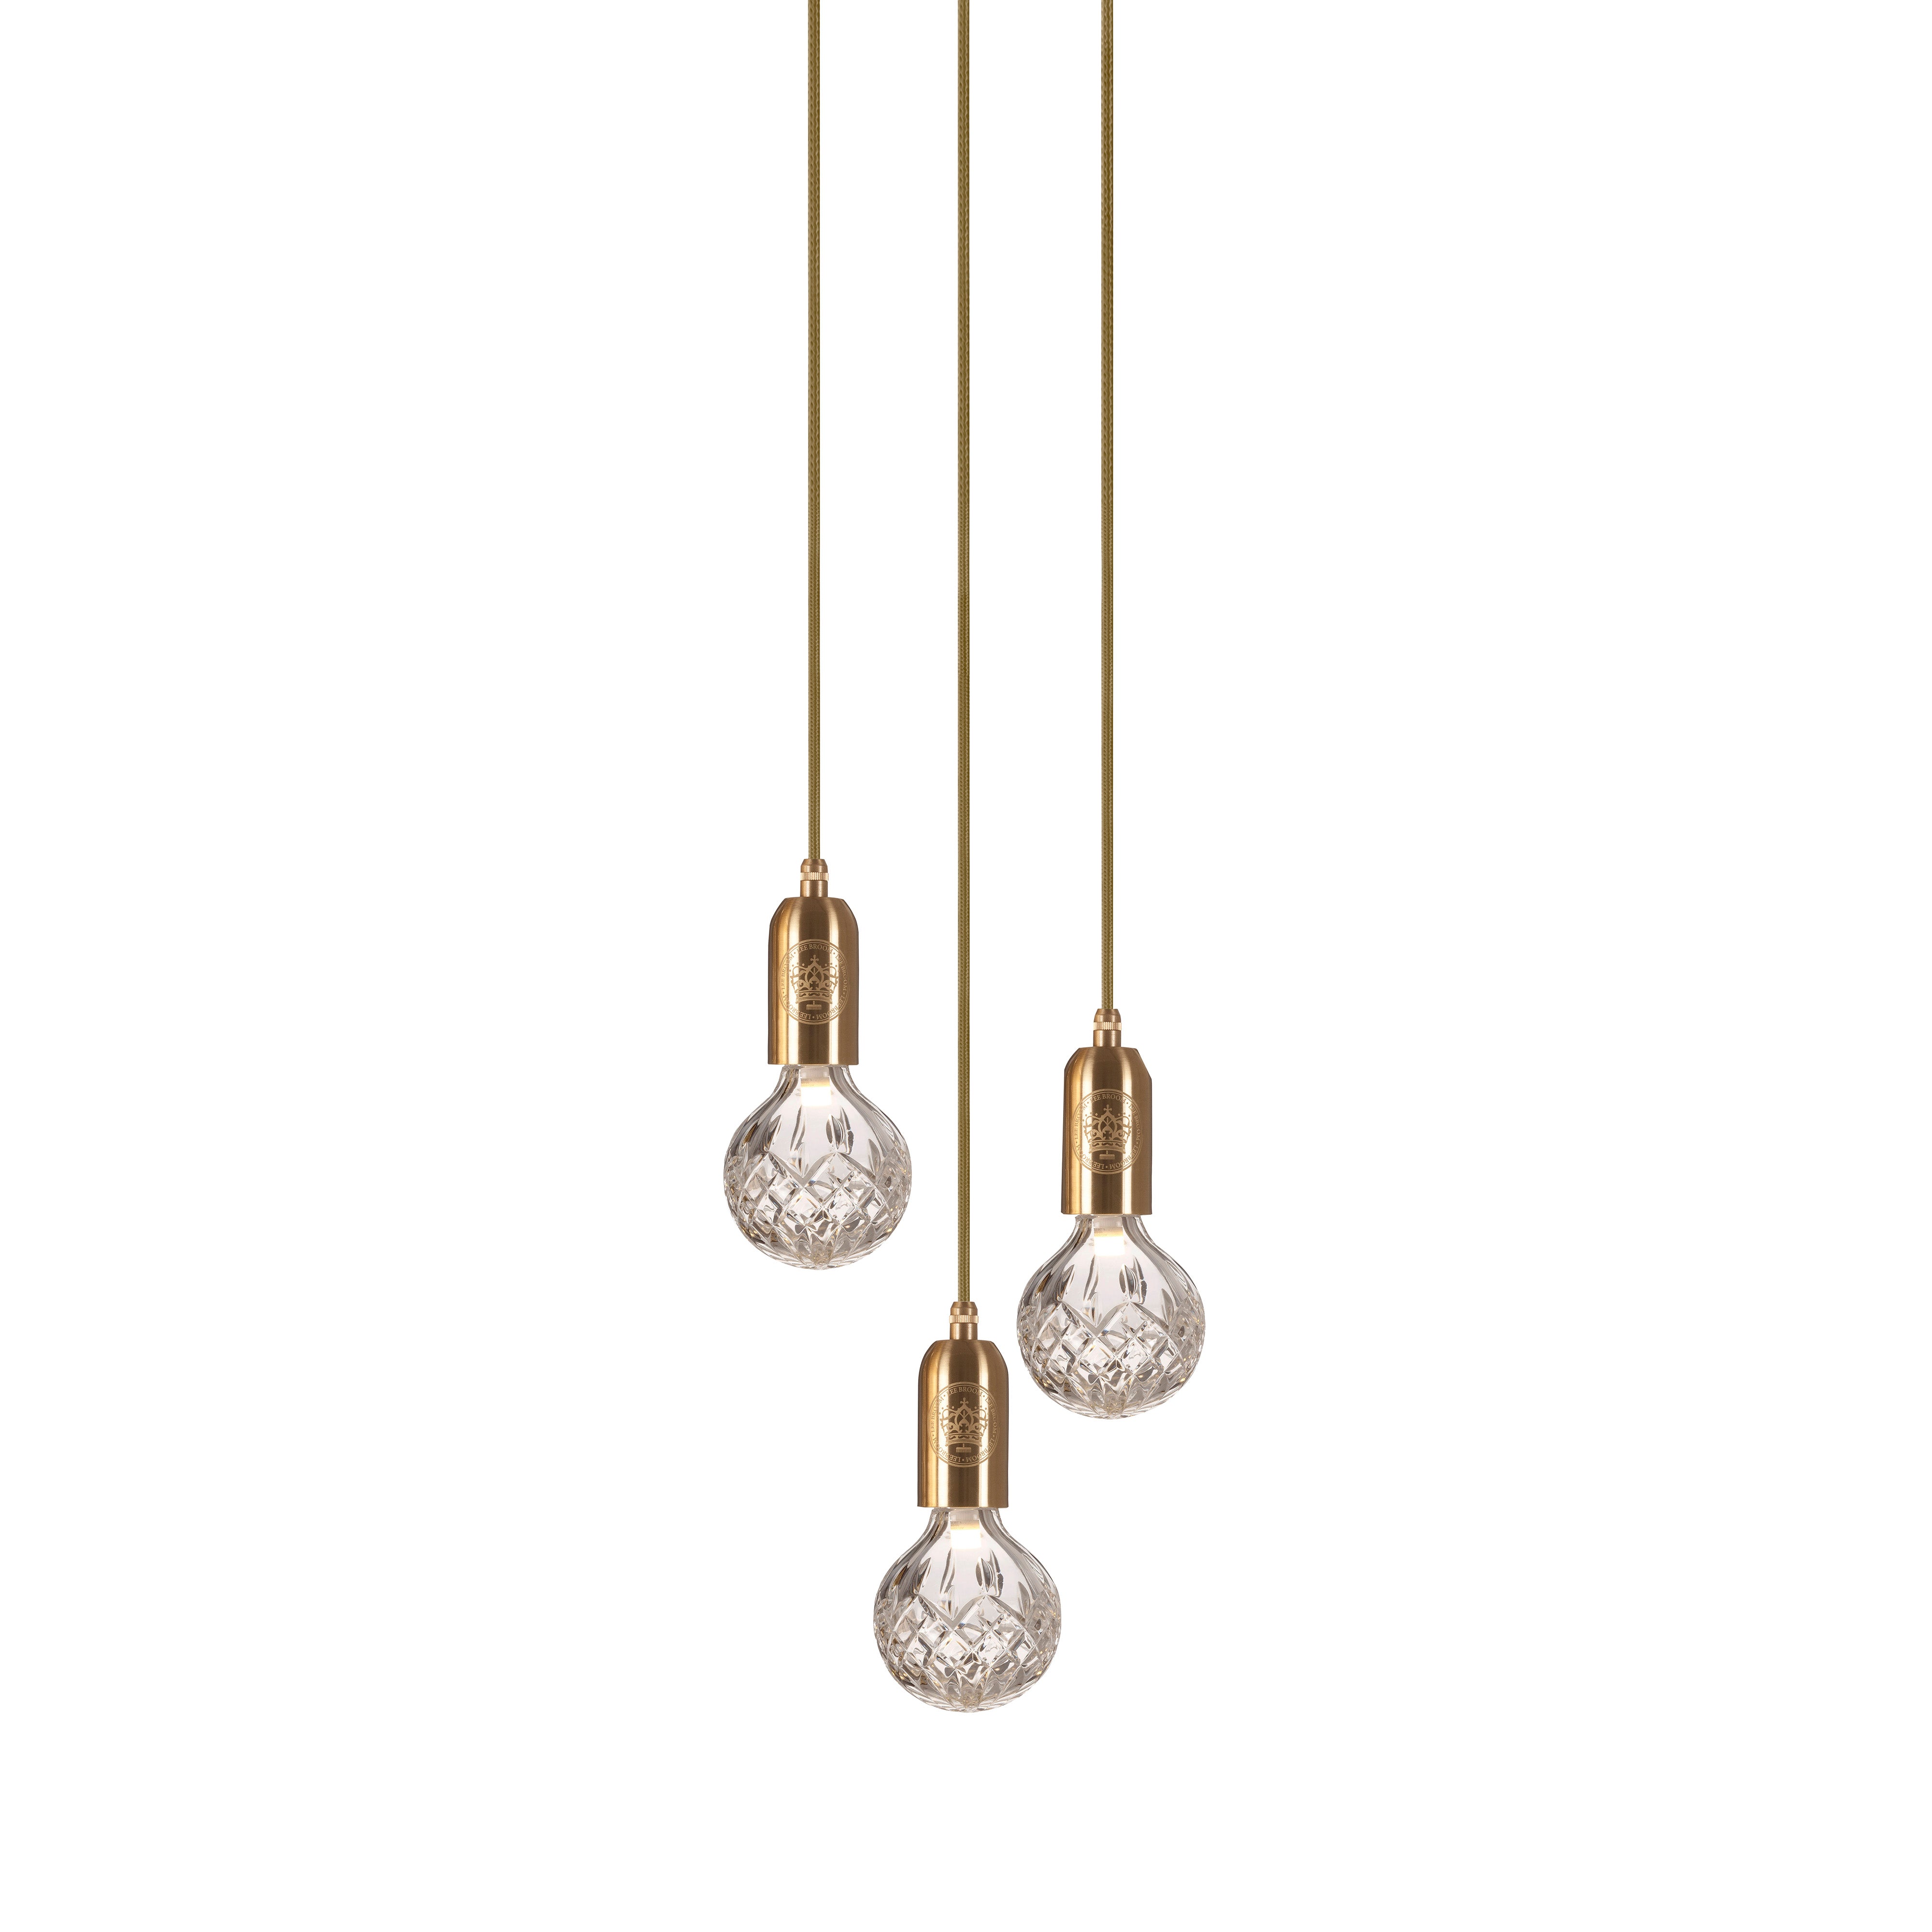 Crystal Bulb Chandelier: 3 Bulb + Brushed Brass + Clear